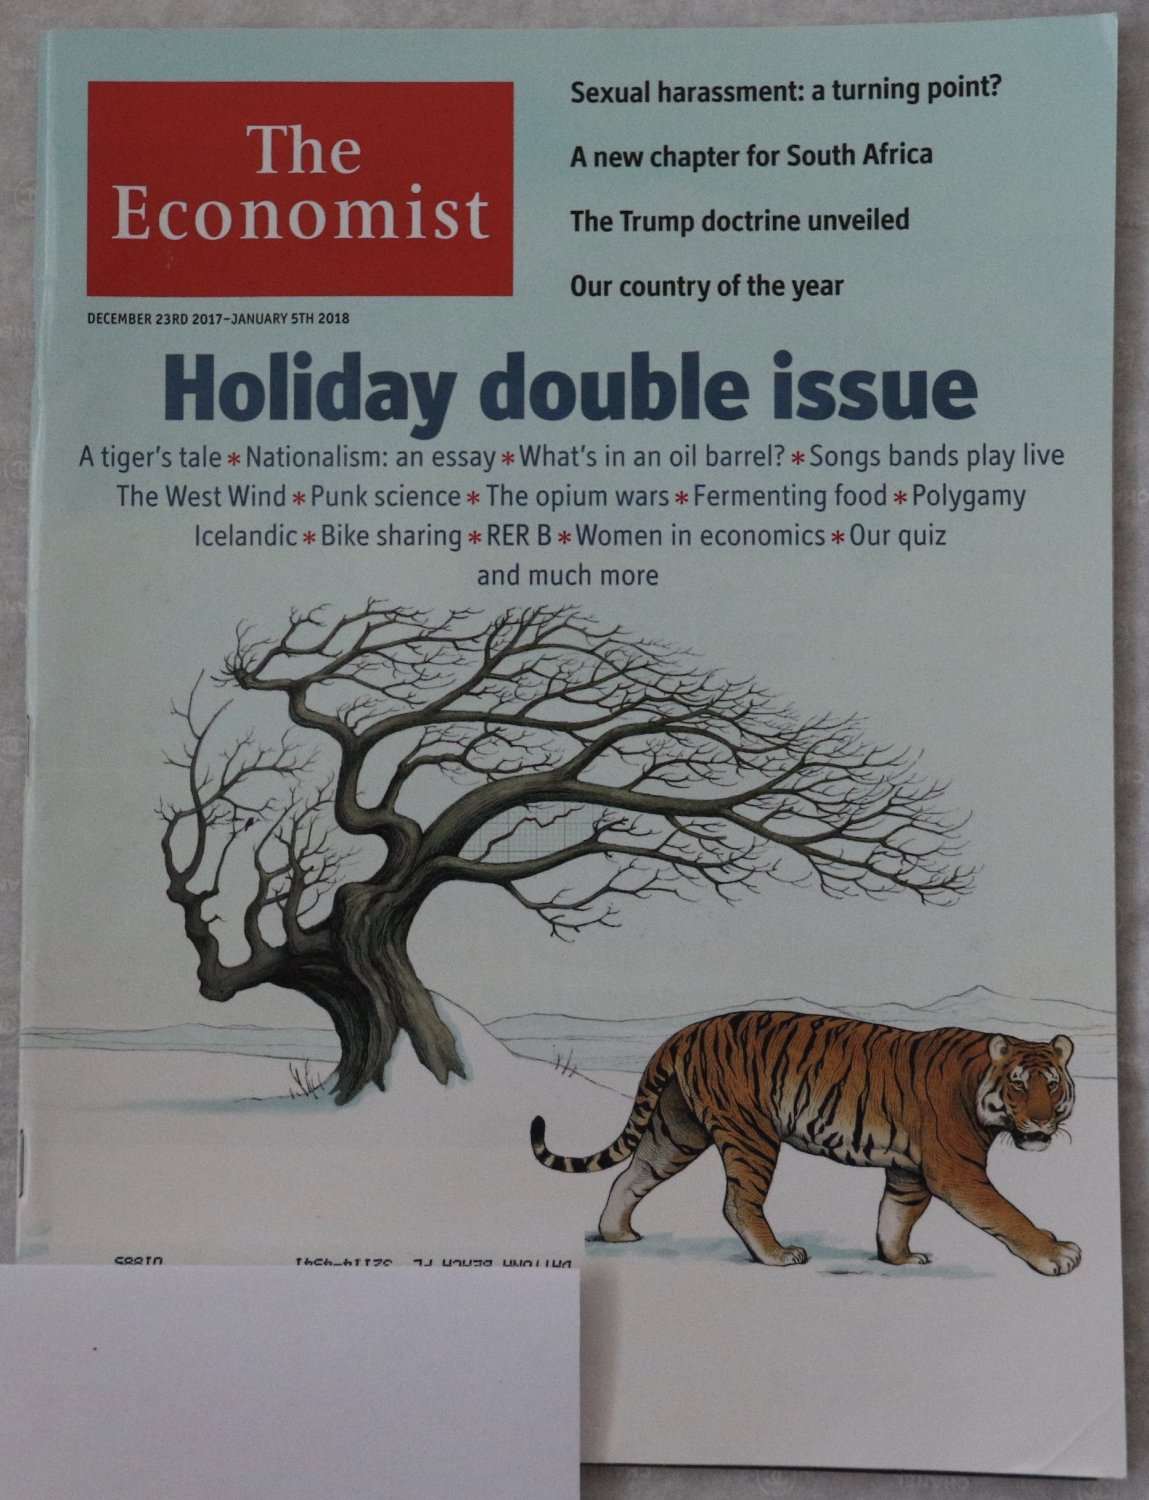 The Economist Magazine Holiday Double Issue December 2017 - January 2018